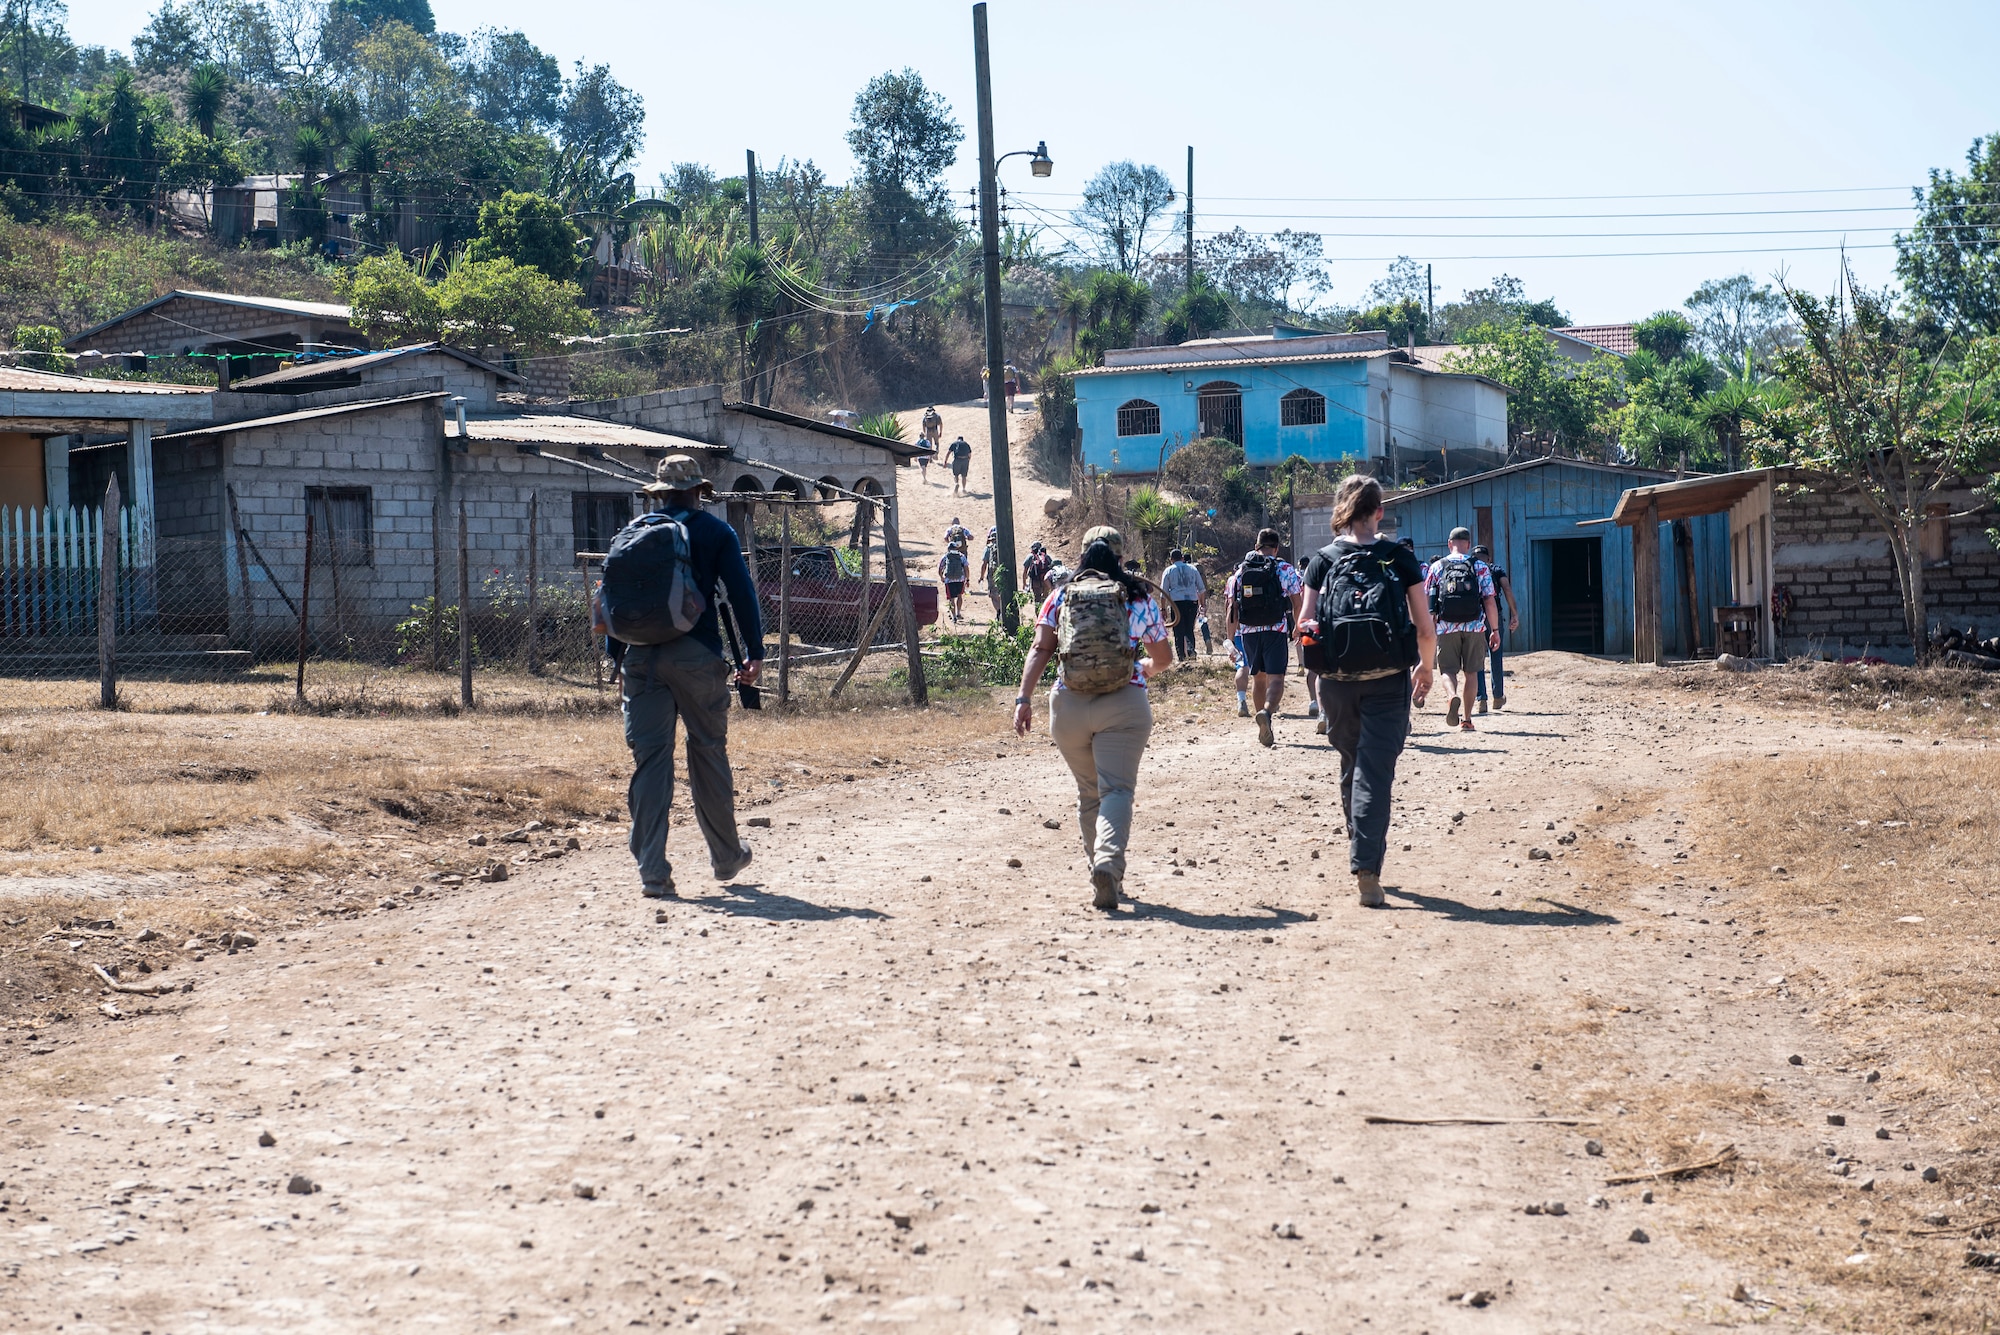 Joint Task Force-Bravo Chapel Hike 78 volunteers walk to a community center in the mountains of La Paz, Honduras, March 30, 2019.